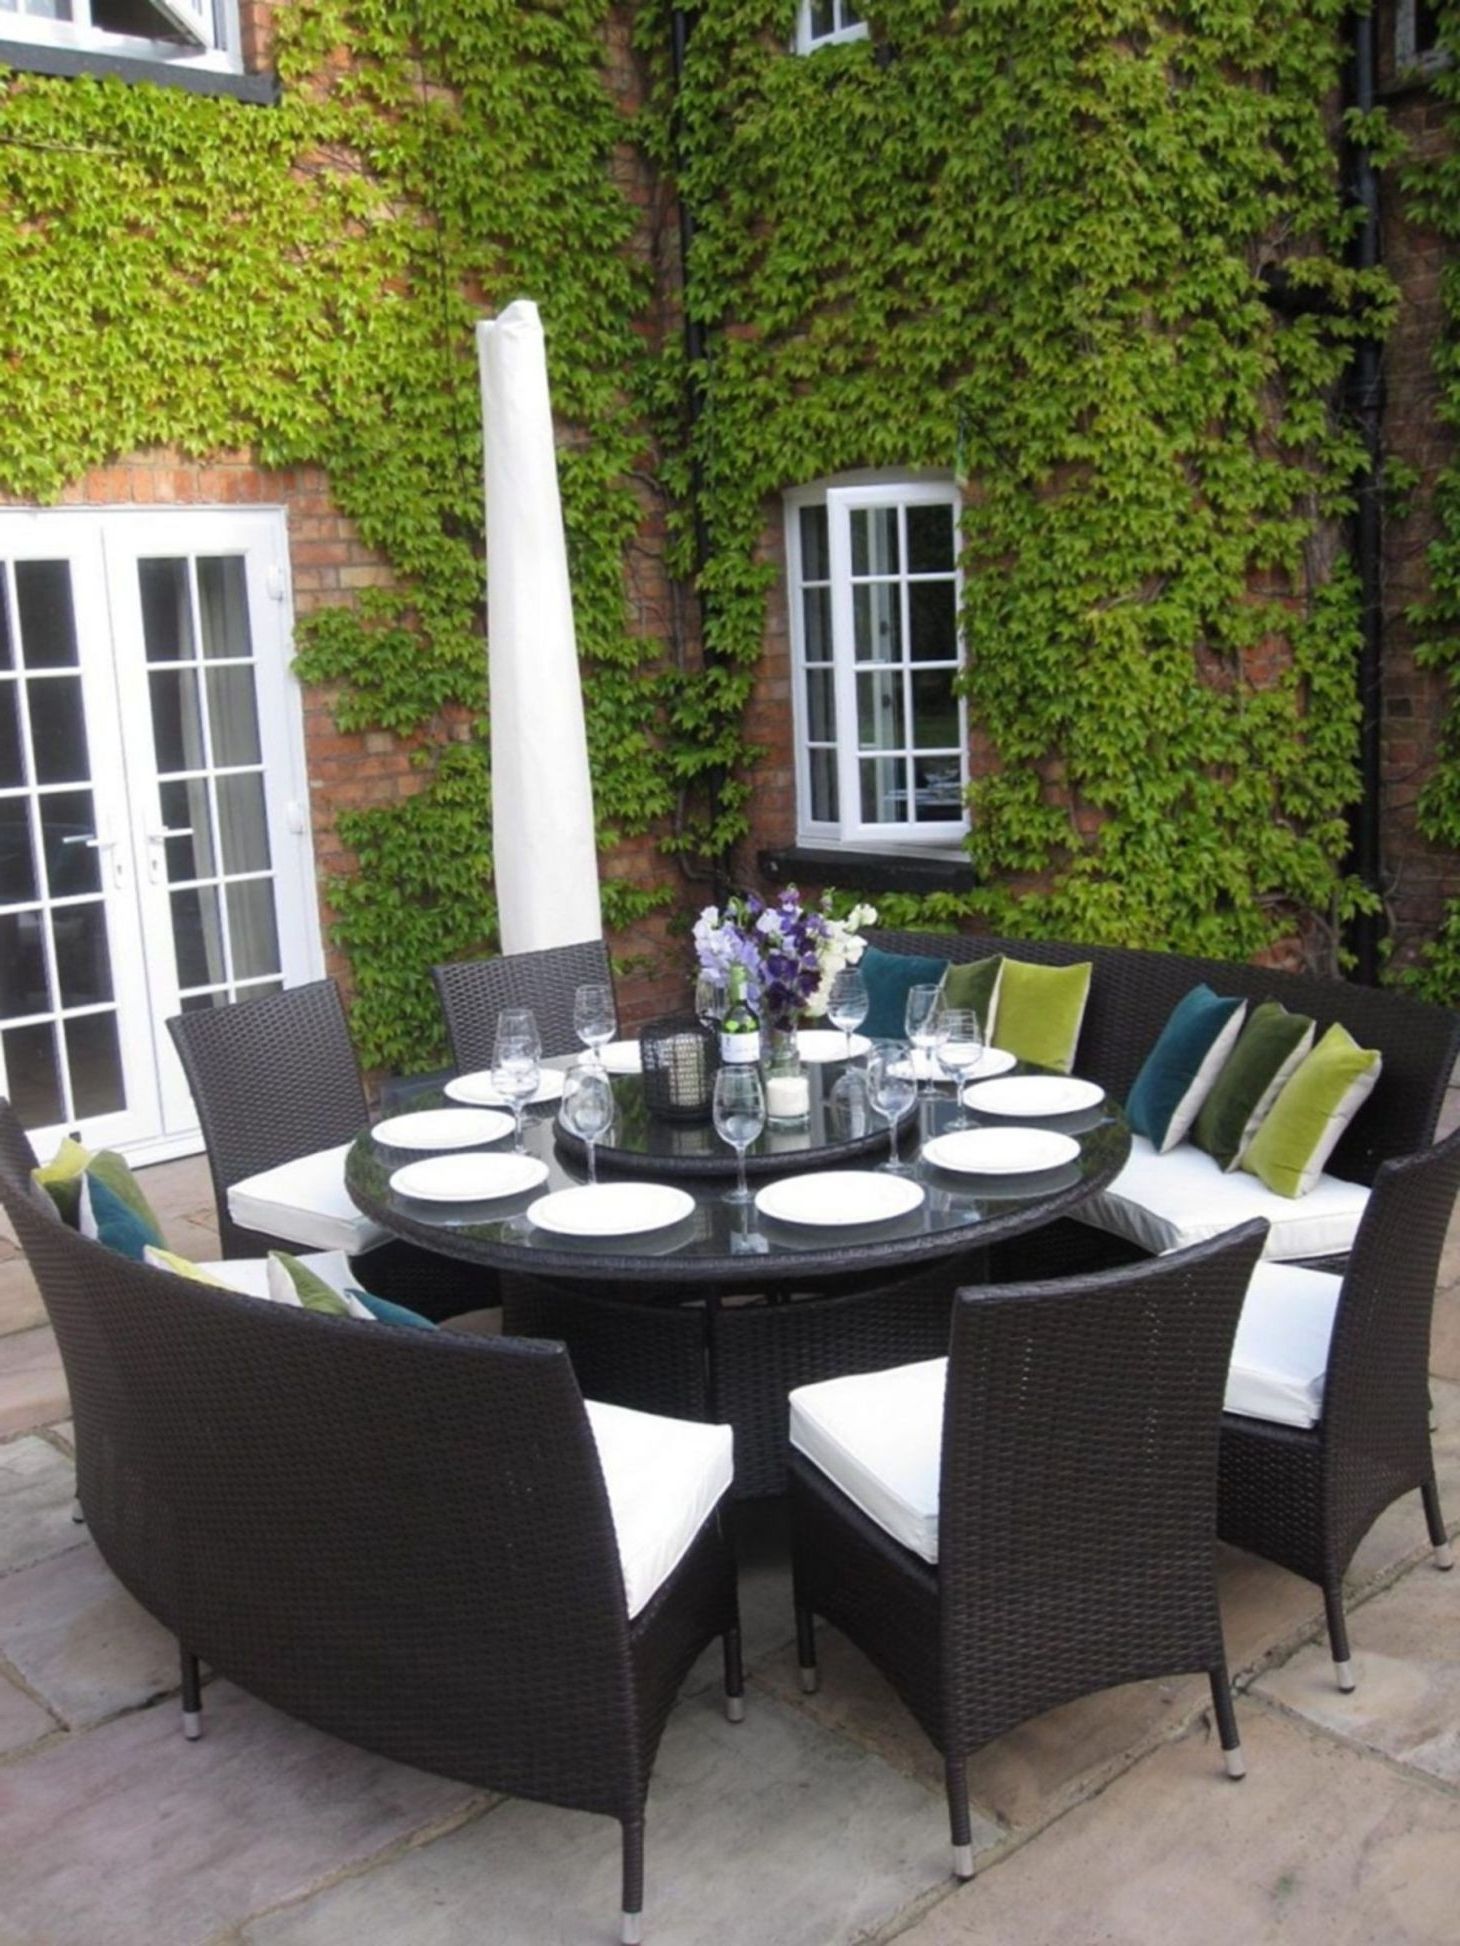 Large Round Outdoor Dining Table – Ideas On Foter Throughout Current Circular Outdoor Tables (View 3 of 15)